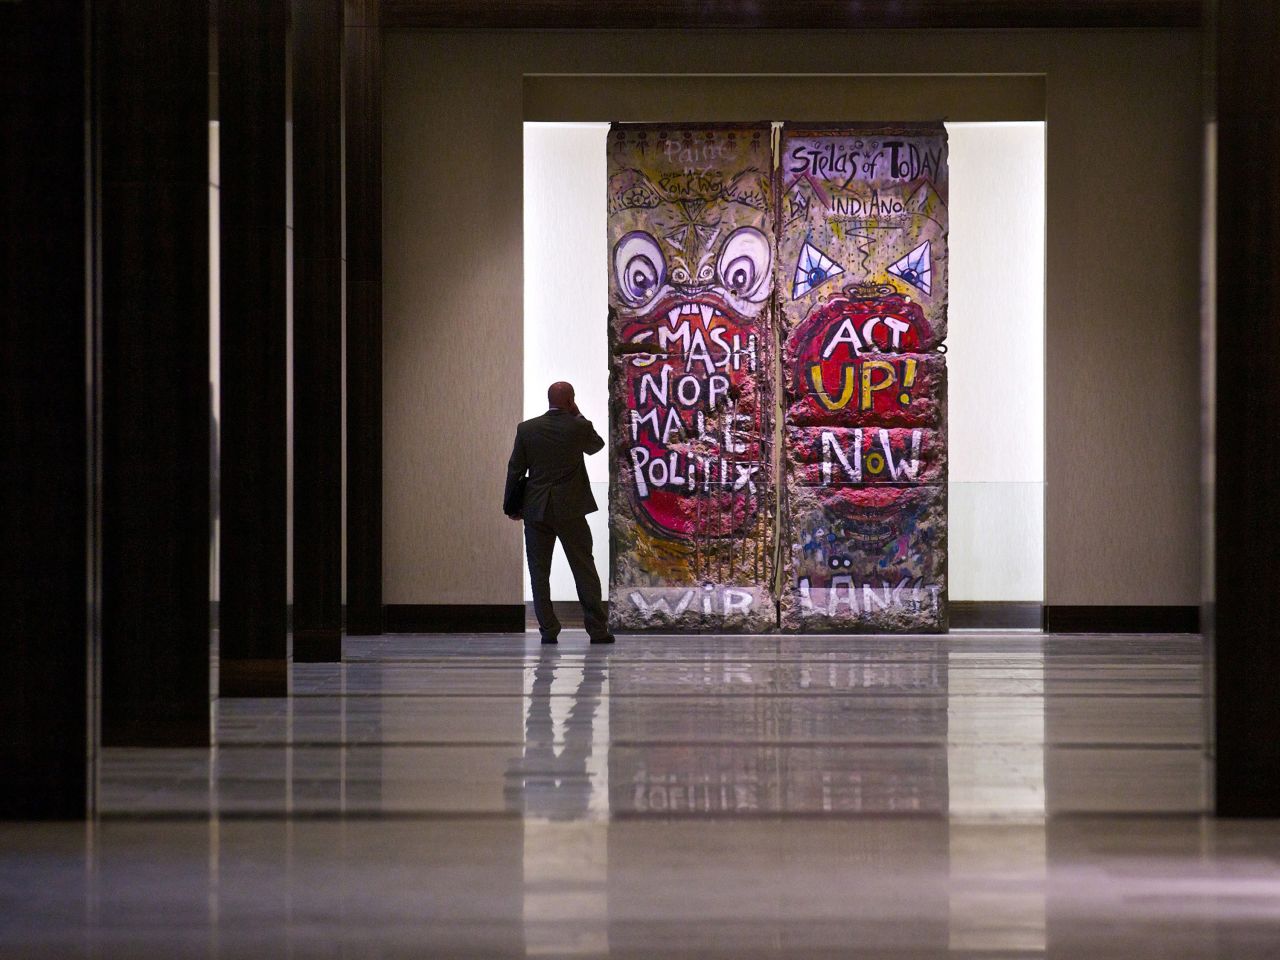 Two segments of the Berlin Wall are a highlight of the 1,606-room Hilton Anatole in Dallas, which hosts a <a href="http://www.hilton.com/en/hotels/content/DFWANHH/media/pdf/en_DFWANHH_fact_sheet.pdf" target="_blank" target="_blank">massive art collection</a> of more than a thousand pieces throughout 27 floors.